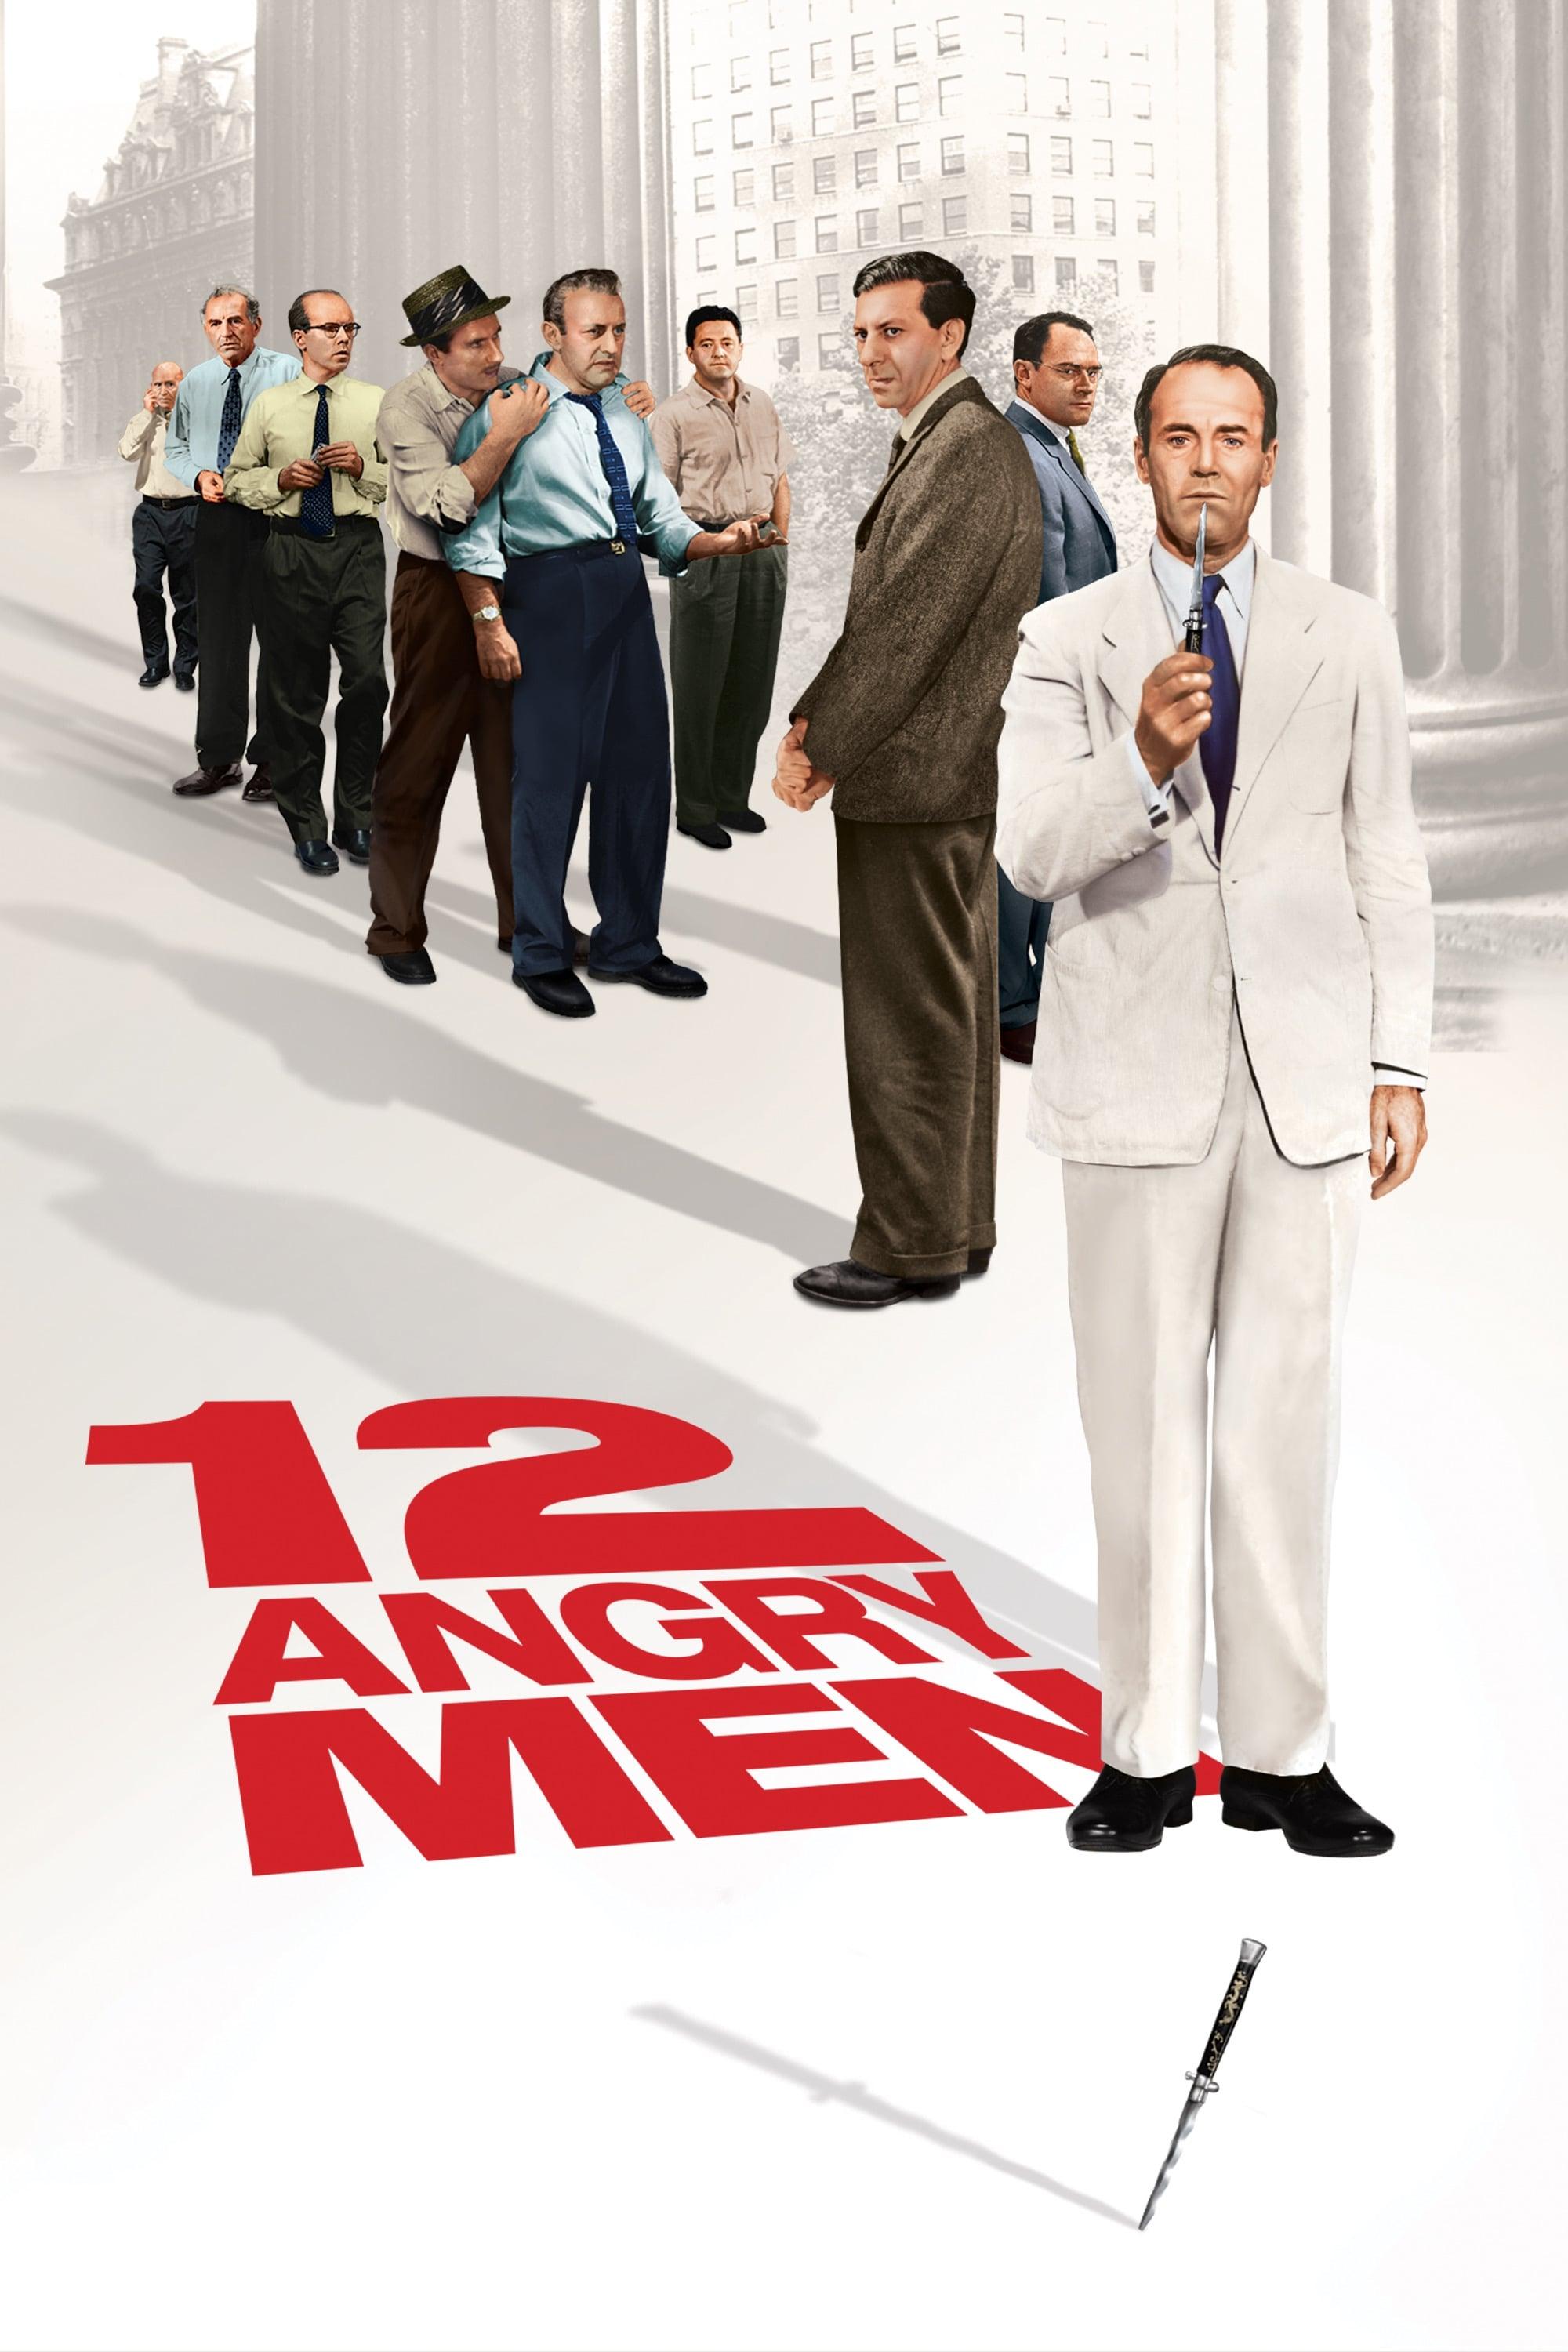 Movie poster of "12 Angry Men"